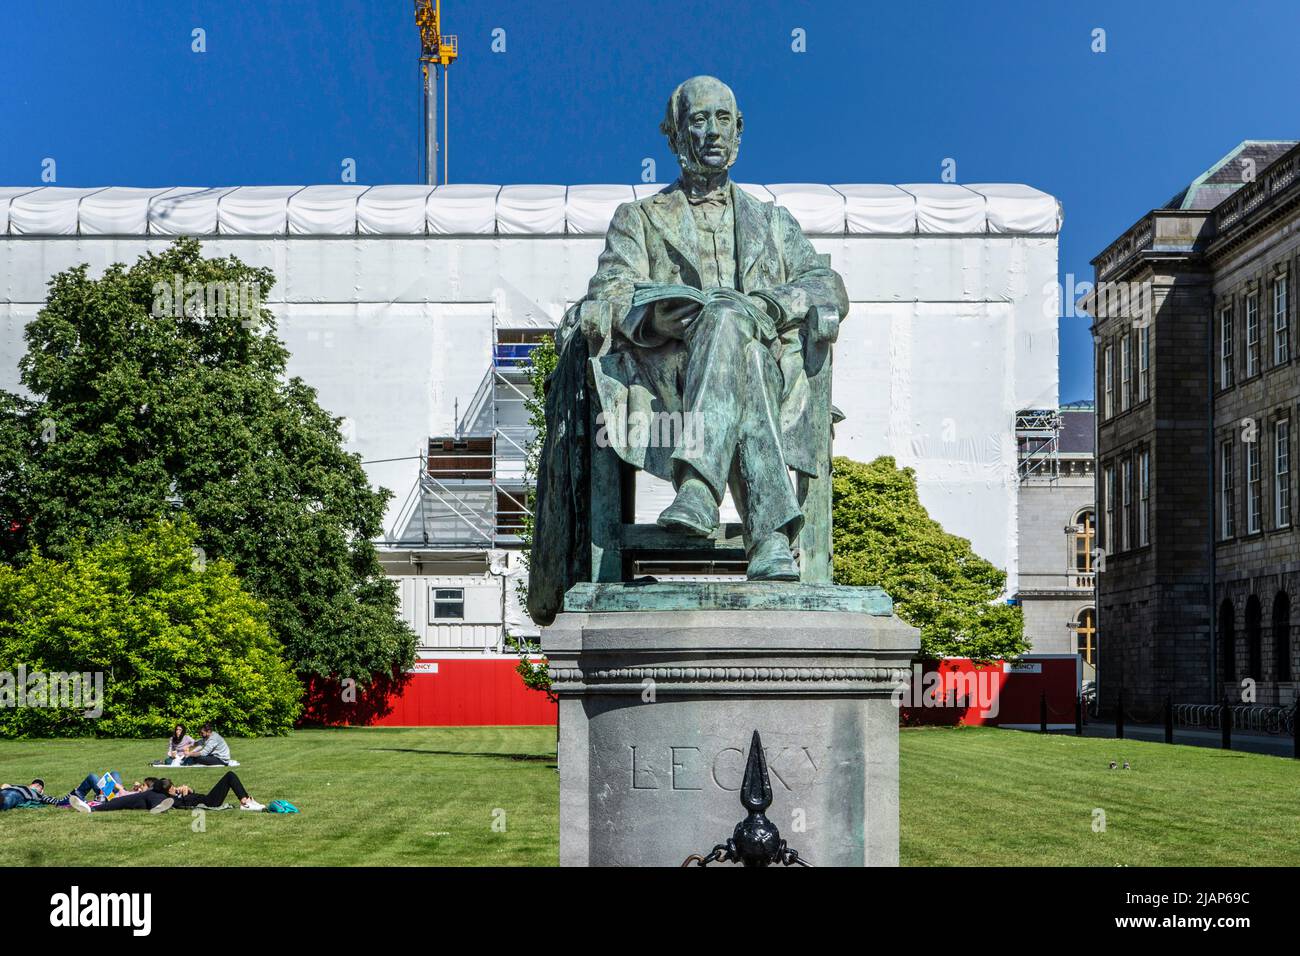 A statue to William Lecky, the Irish historian, essayist and political analyst, in the grounds of Trinity College in Dublin, Ireland. Sir William John Stock Photo